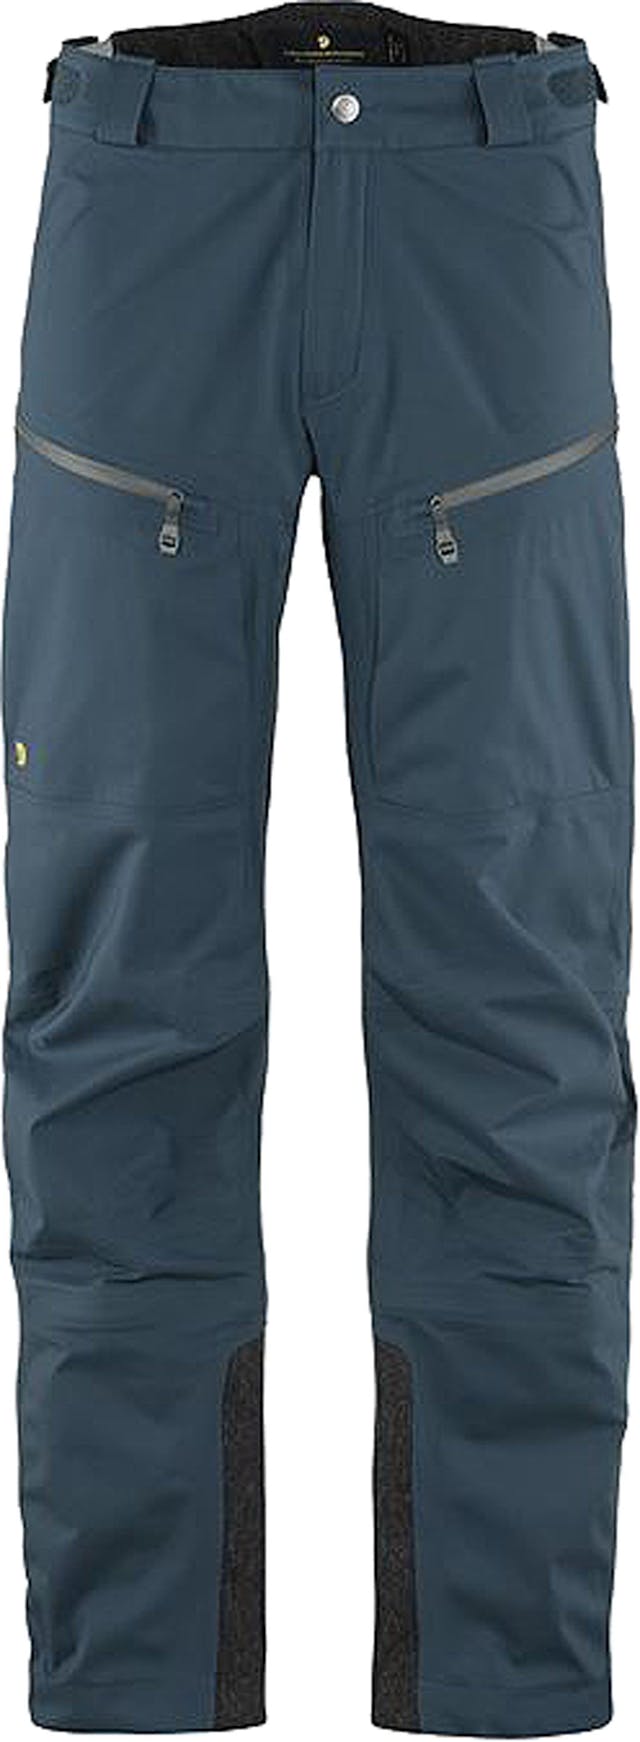 Product image for Bergtagen Eco-Shell Trousers -  Men's